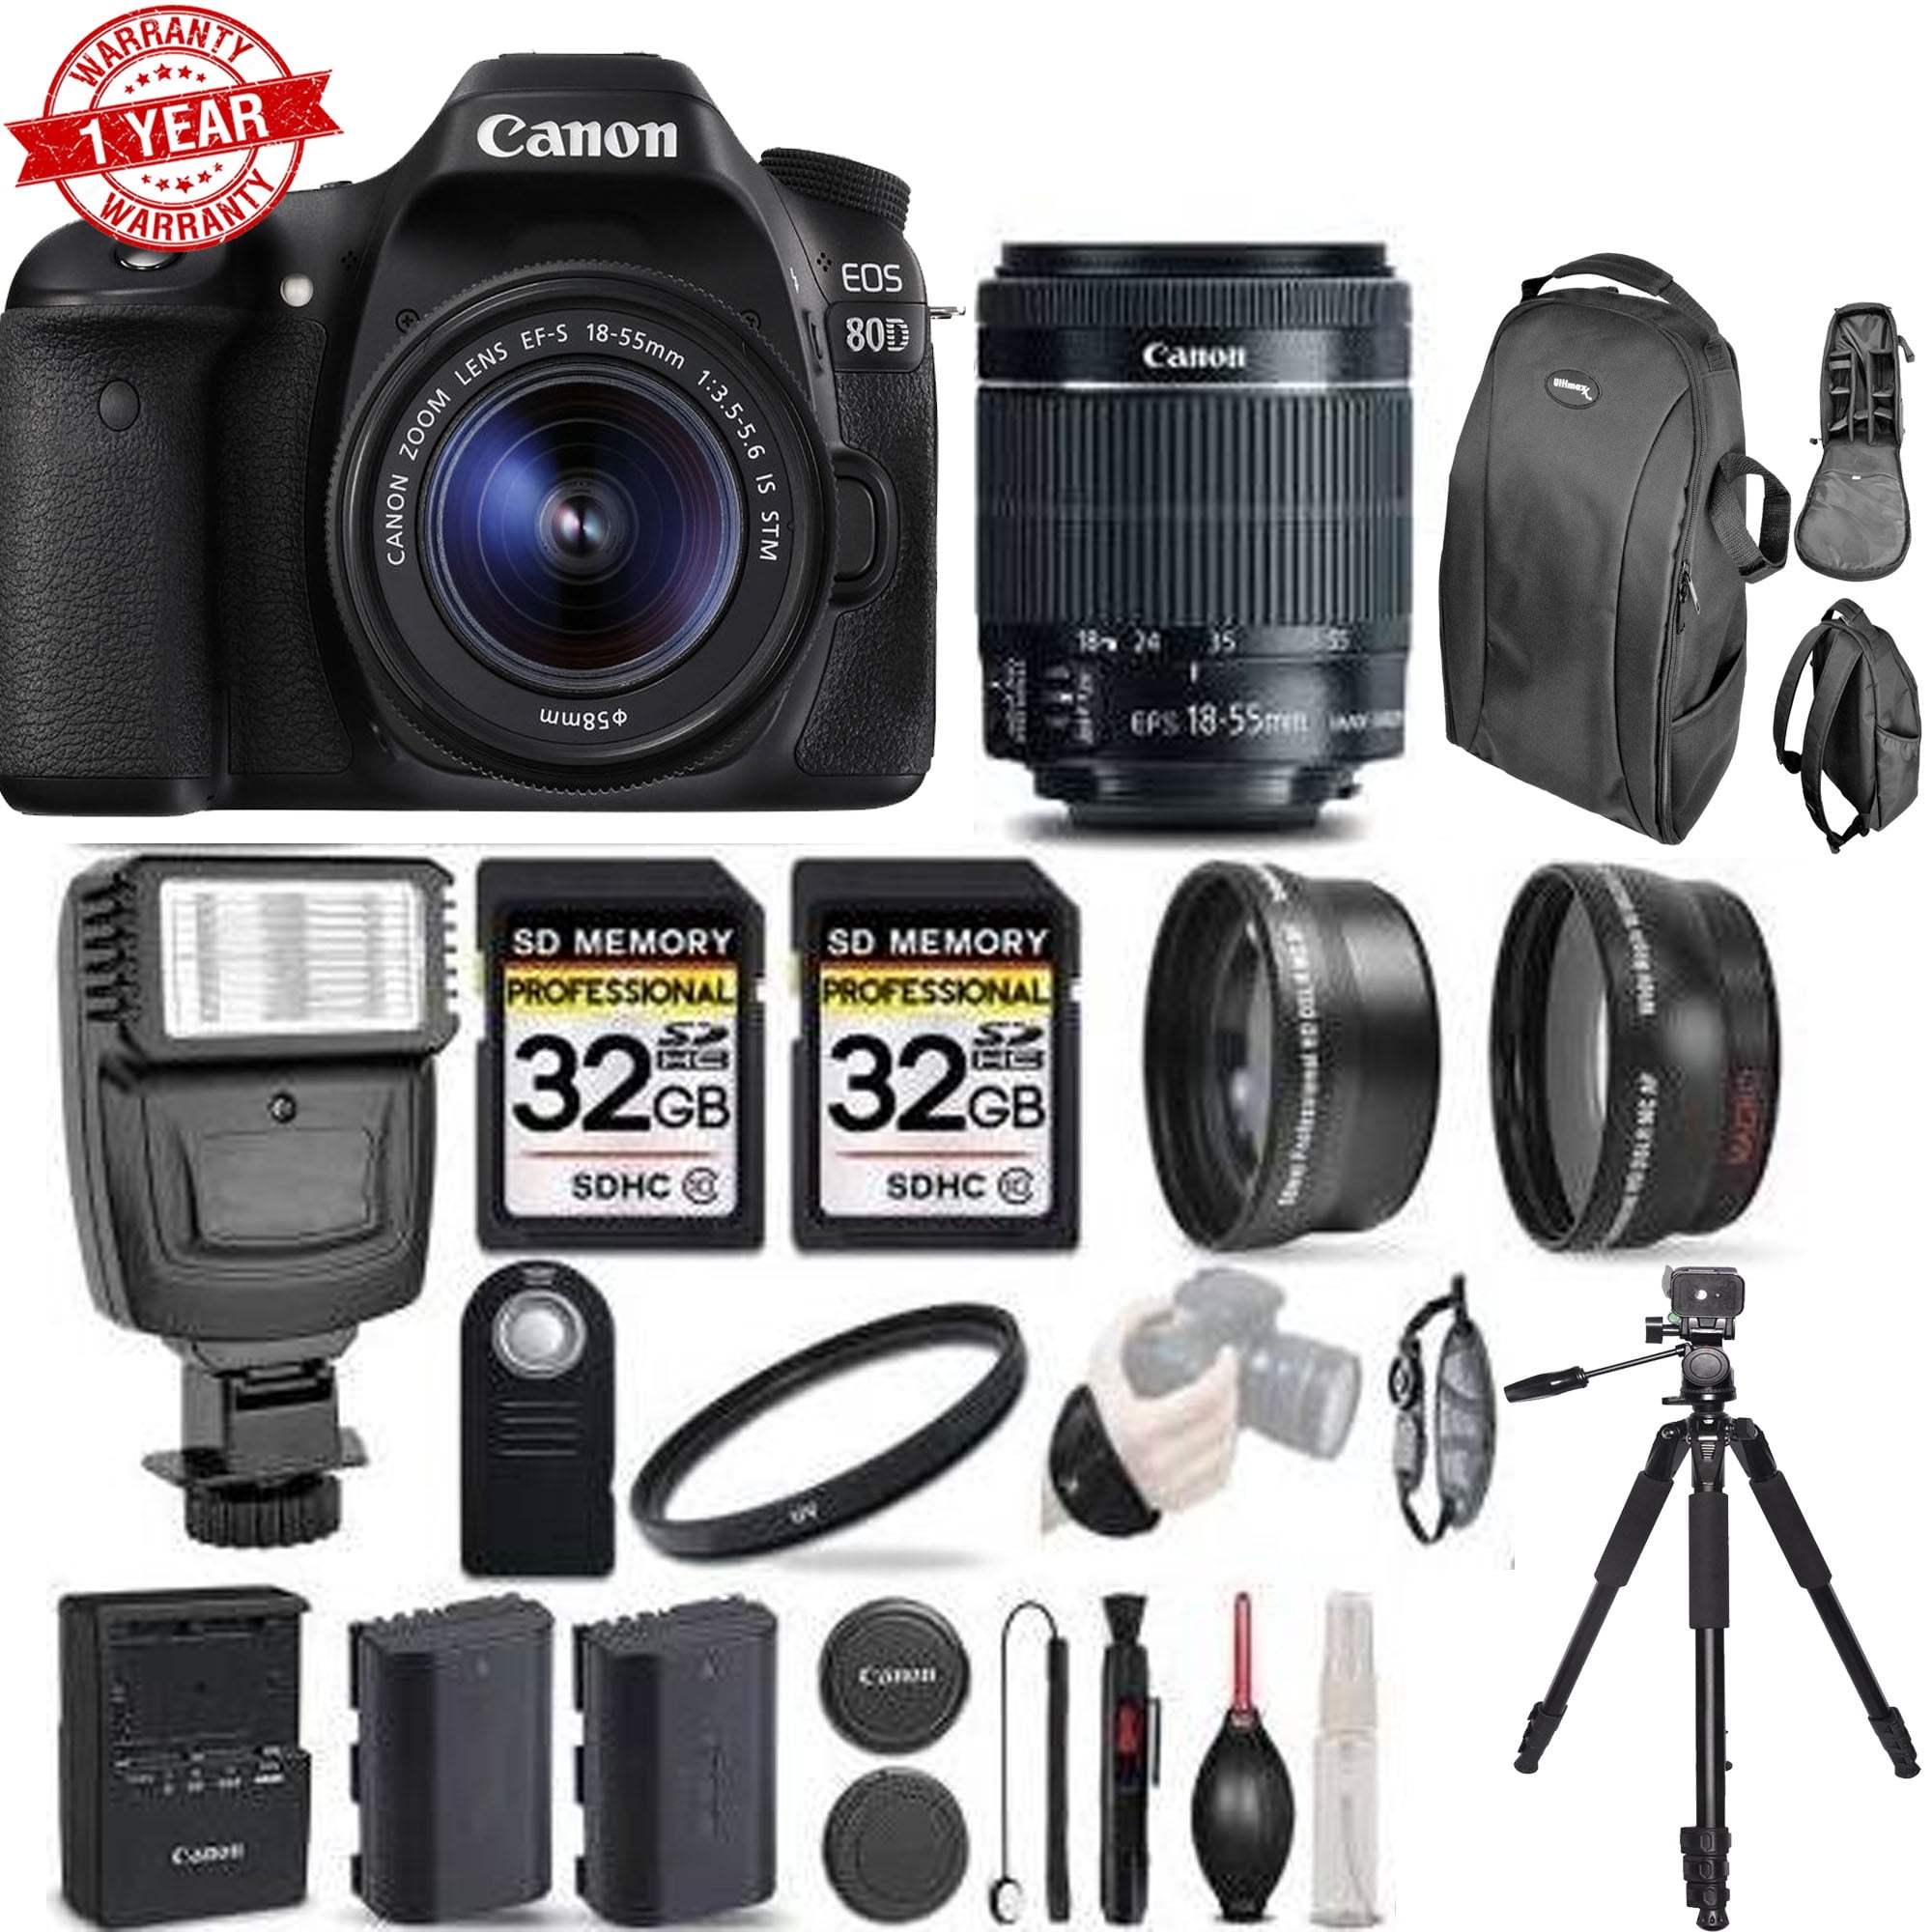 Canon EOS 80D Digital SLR Camera Kit with 18-55mm STM Lens w/ 64GB MC &  Additional Accessories